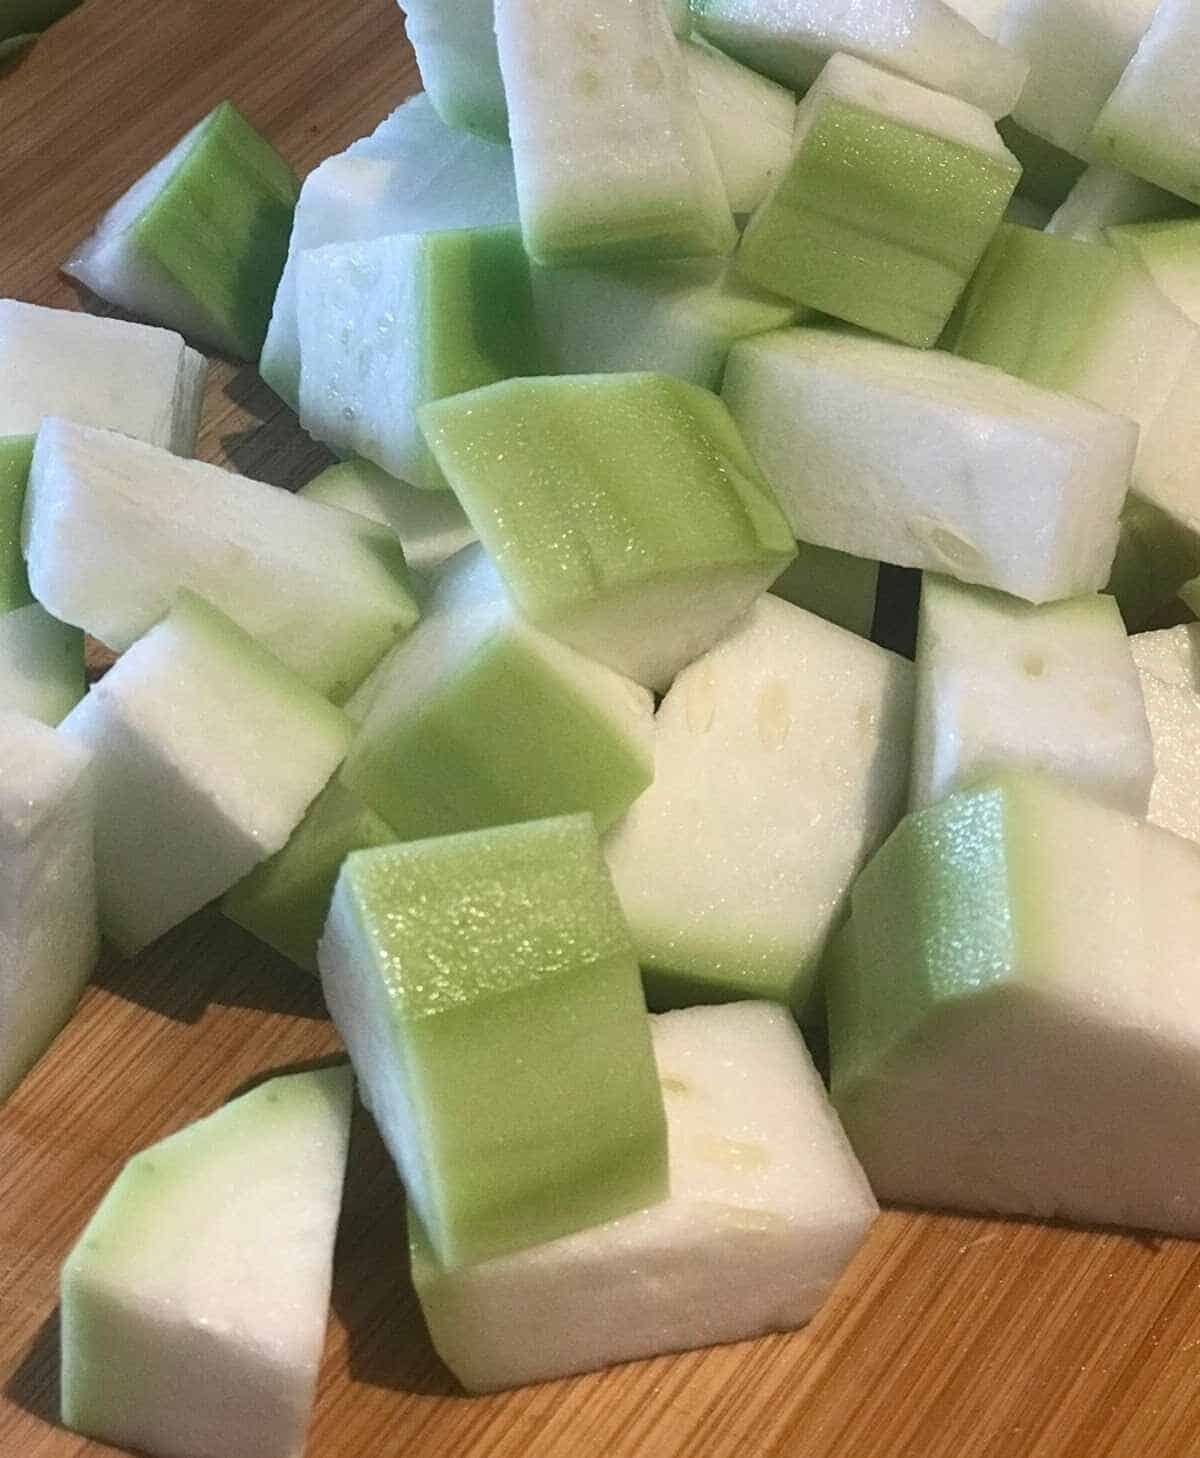 chopped pieces of bottle gourd on a wooden board